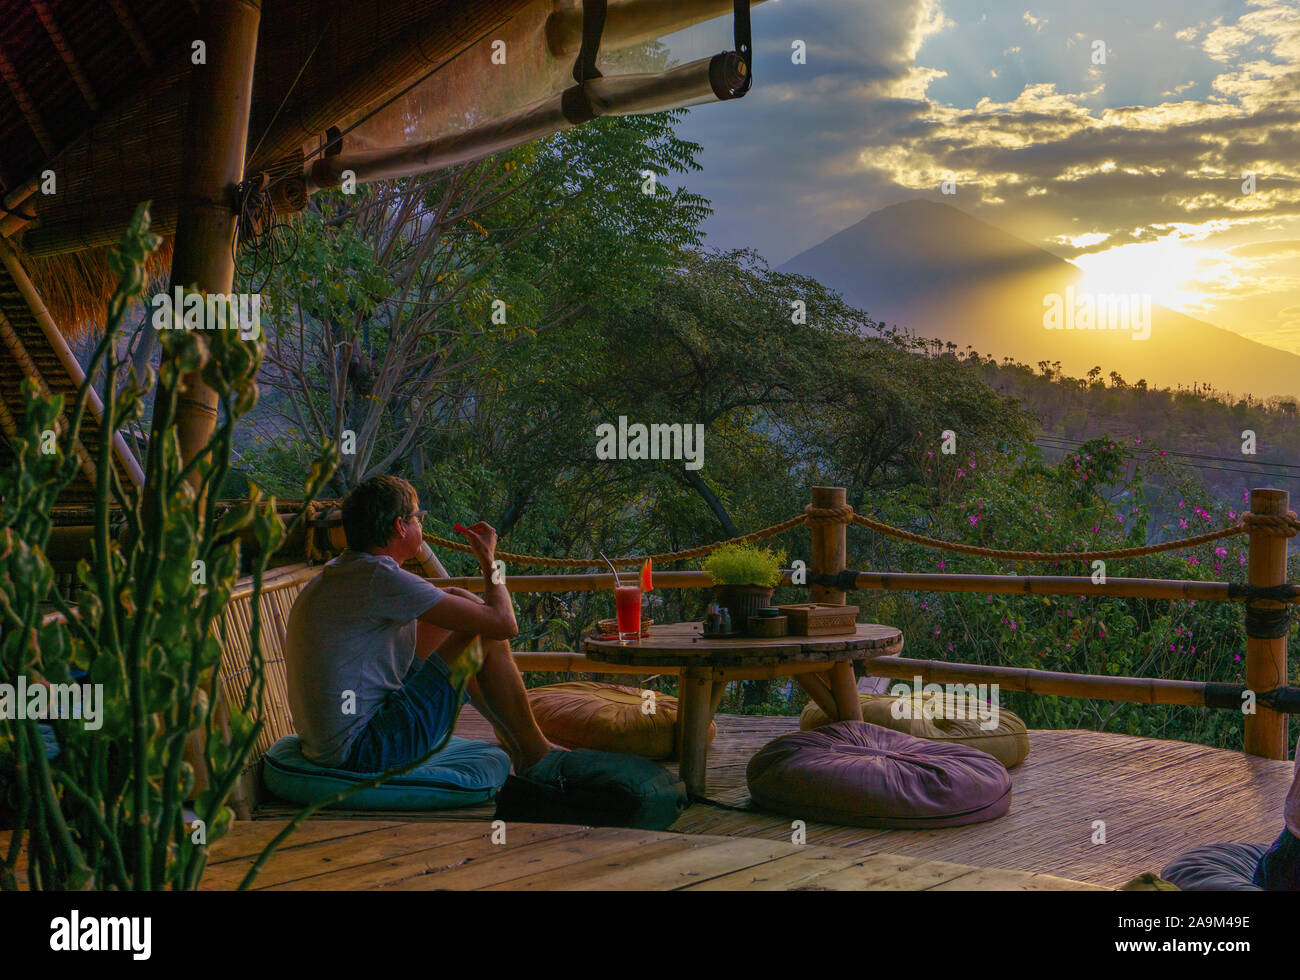 A person enjoying the view of Mount Agung from the terrace of a restaurant in Amed, Bali. Mount Agung is an active volcano. Stock Photo